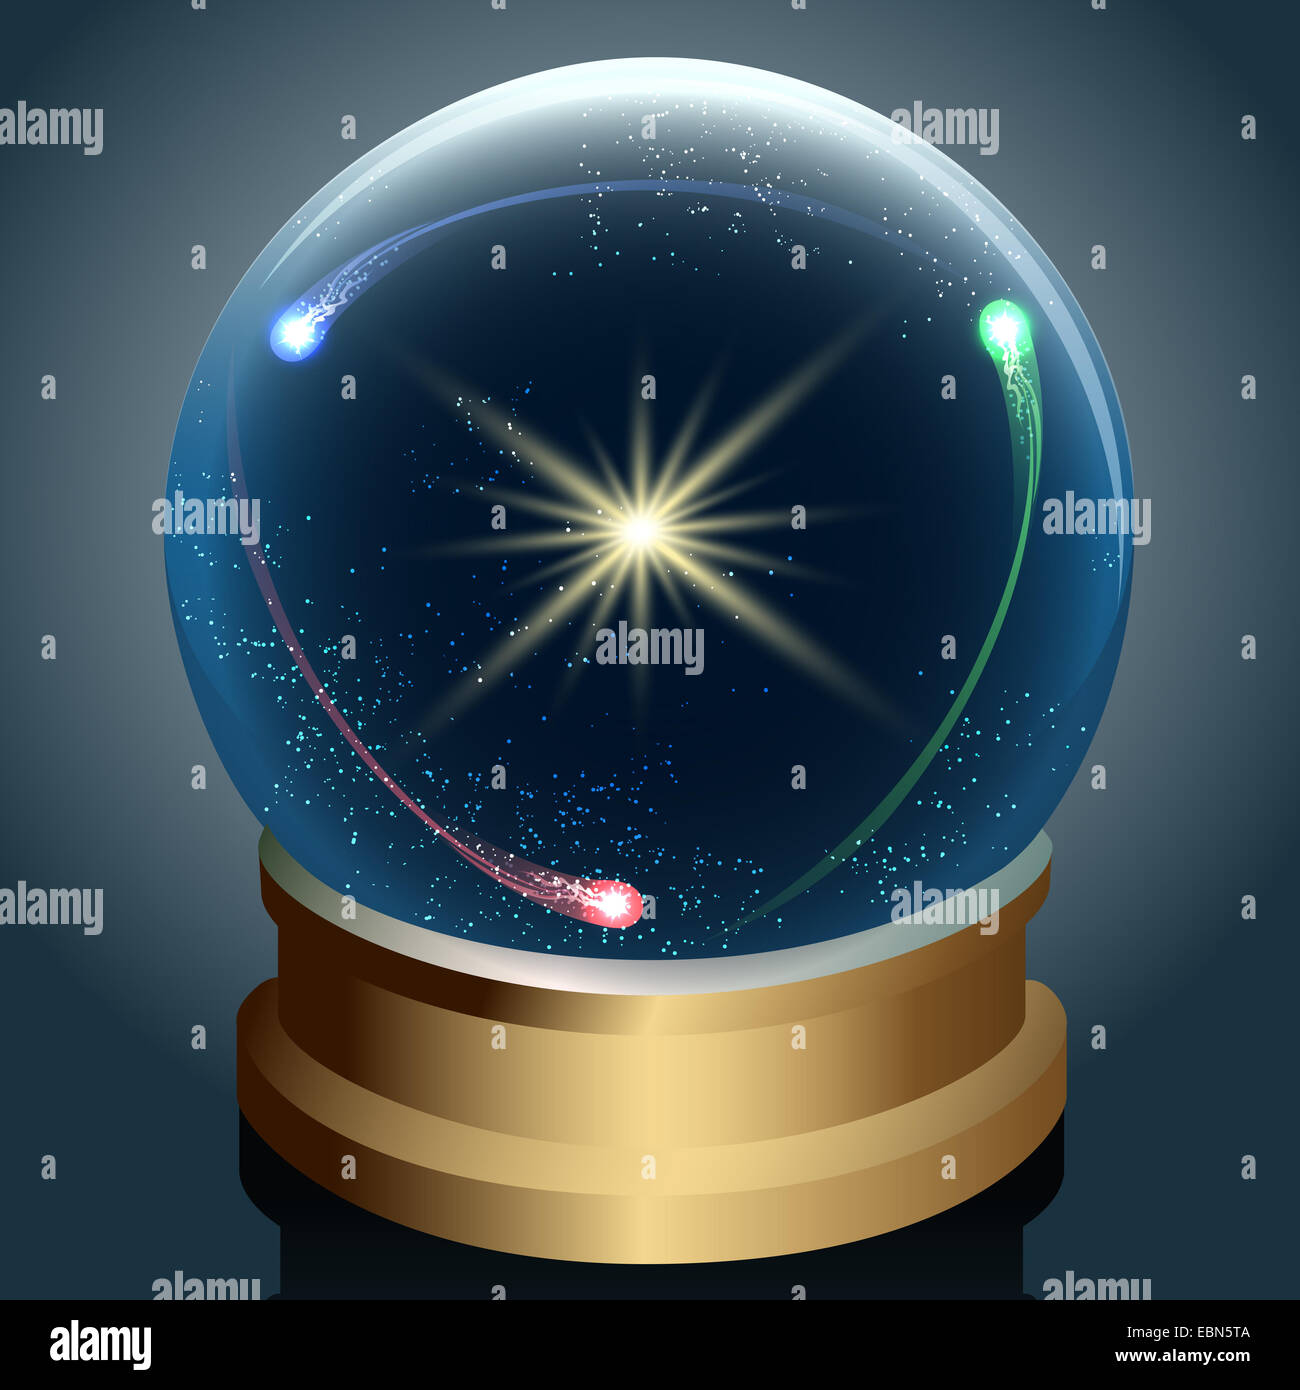 Crystal ball with universe inside Stock Photo